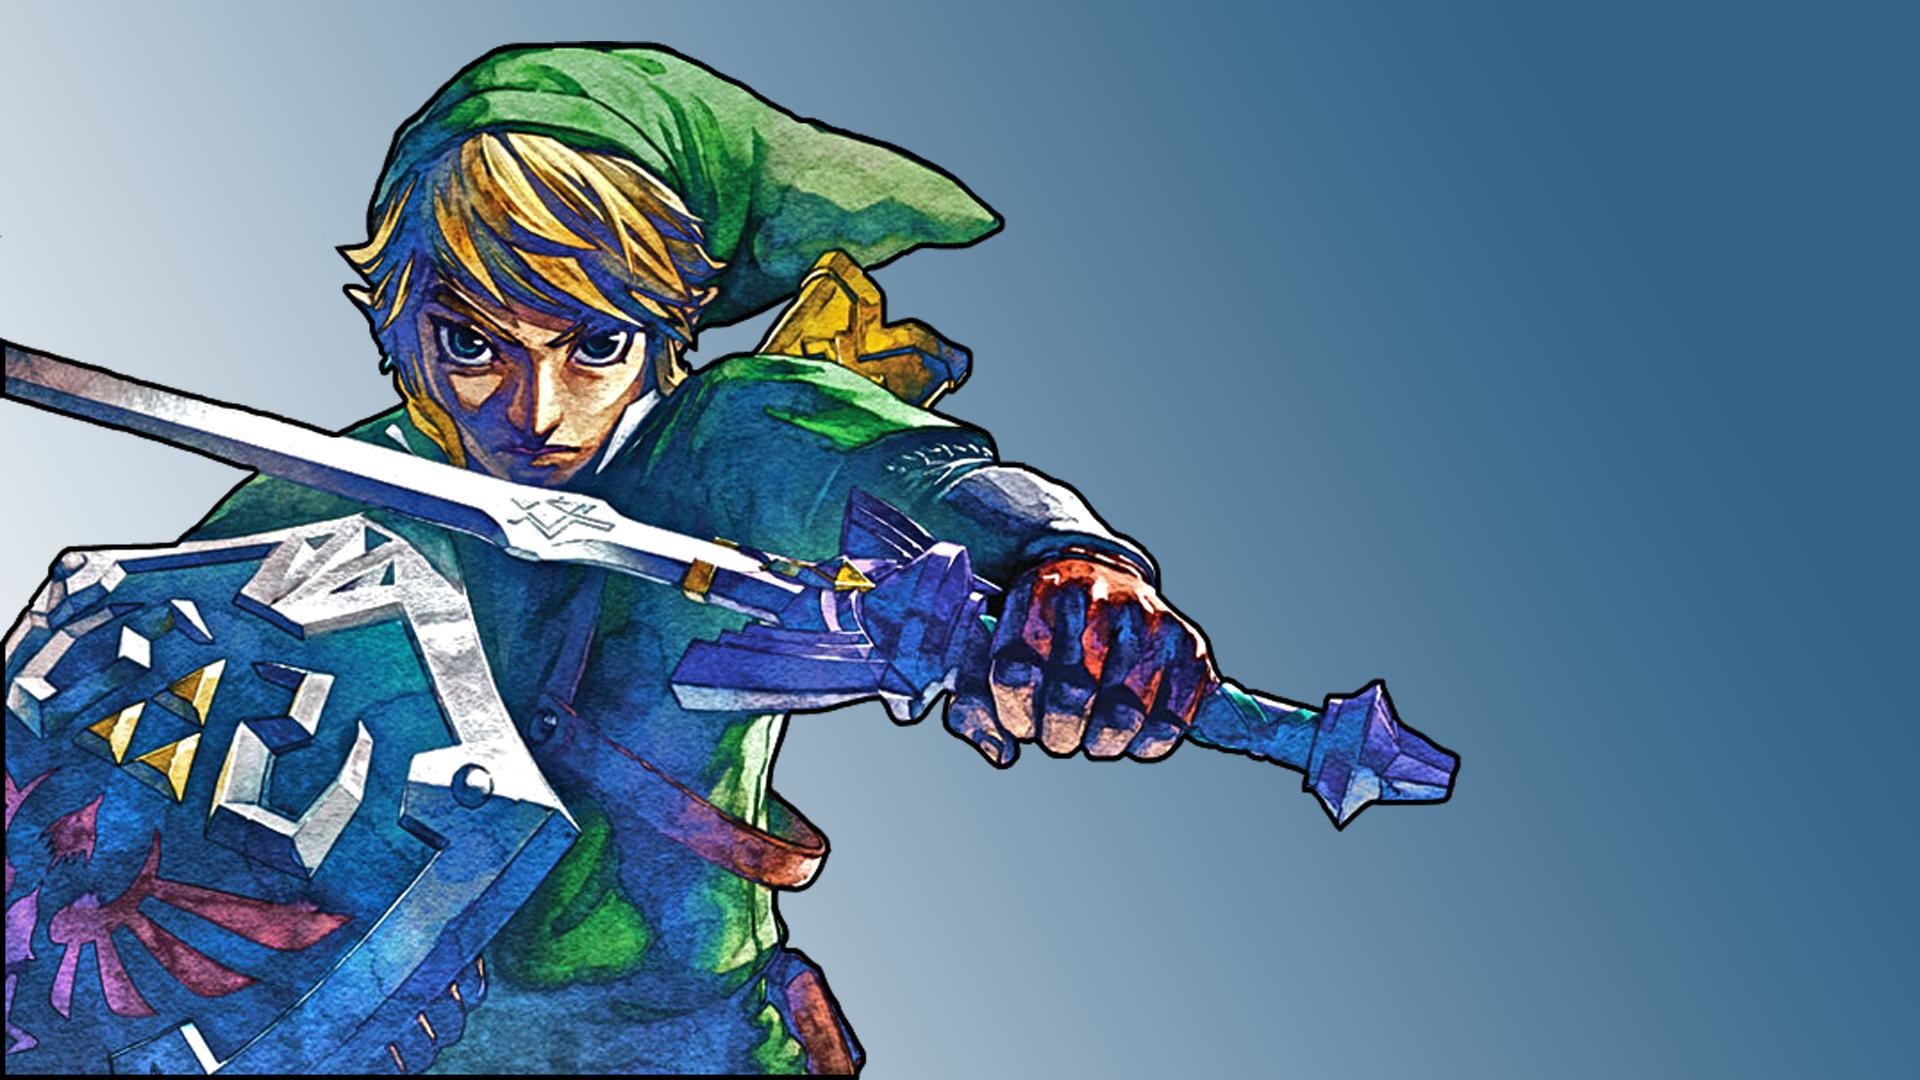 1920x1080 The Legend Of Zelda HD high quality wallpapers download | Throw back  classic games | Pinterest | Zelda hd and High quality wallpapers